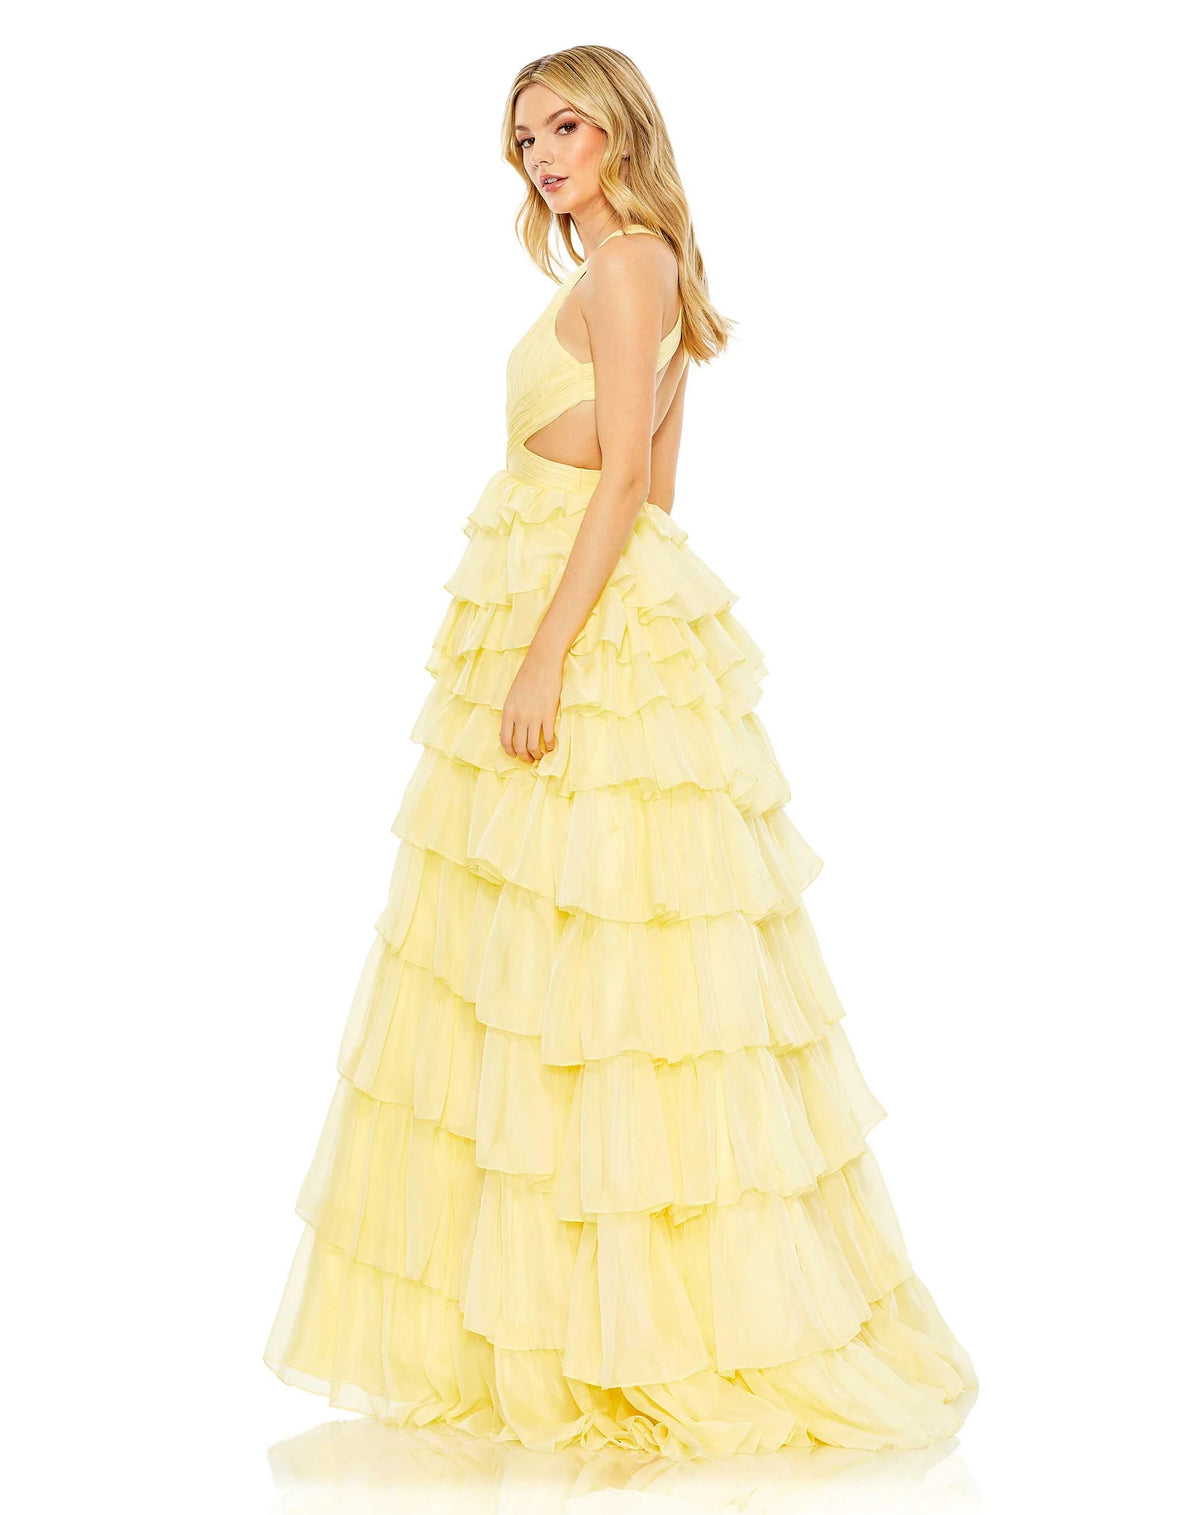 This show-stopping, lemon yellow, prom dress is styled with a pleated bodice with a deep neckline, waist cutouts, and crisscross centre providing the perfect amount of cleavage. With decadent layers of graduated ruffles fill out the full skirt for a design that’s festive and flirty, perfect for Summer weddings and parties side view